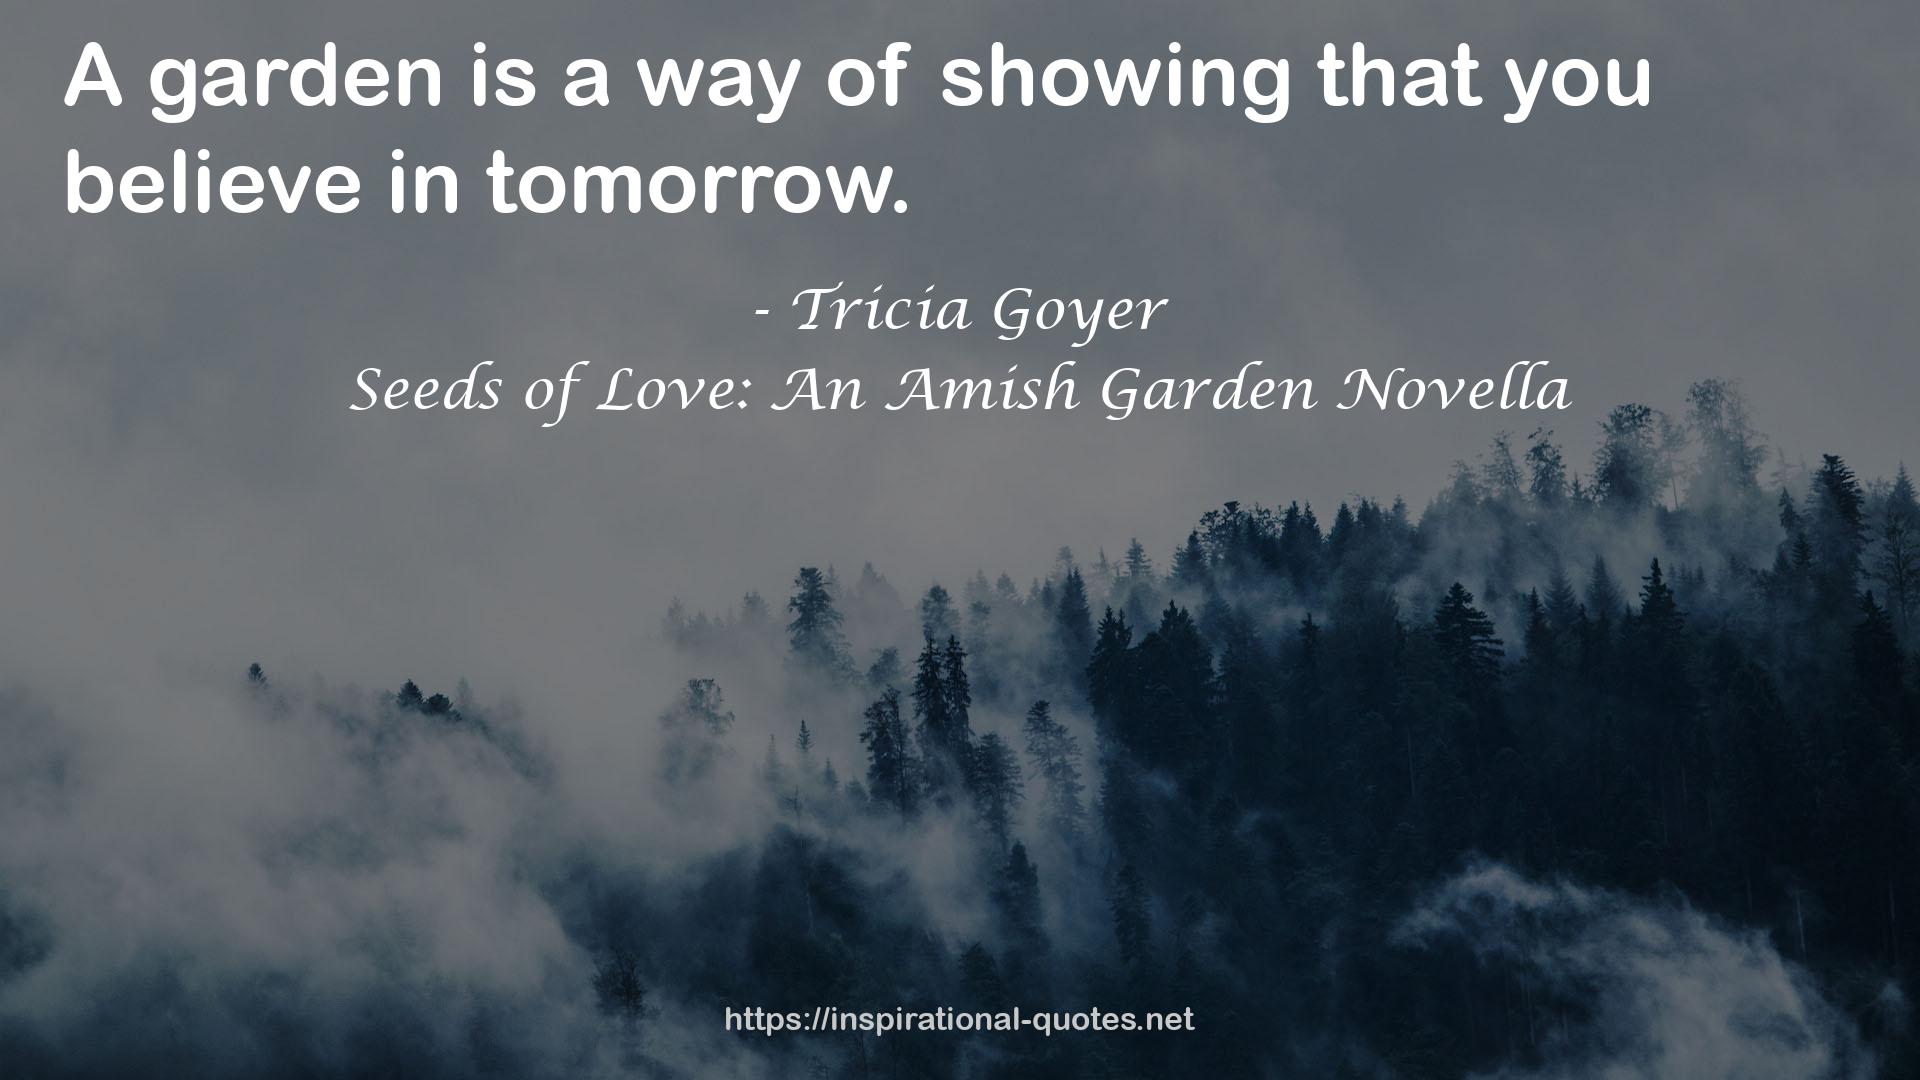 Seeds of Love: An Amish Garden Novella QUOTES